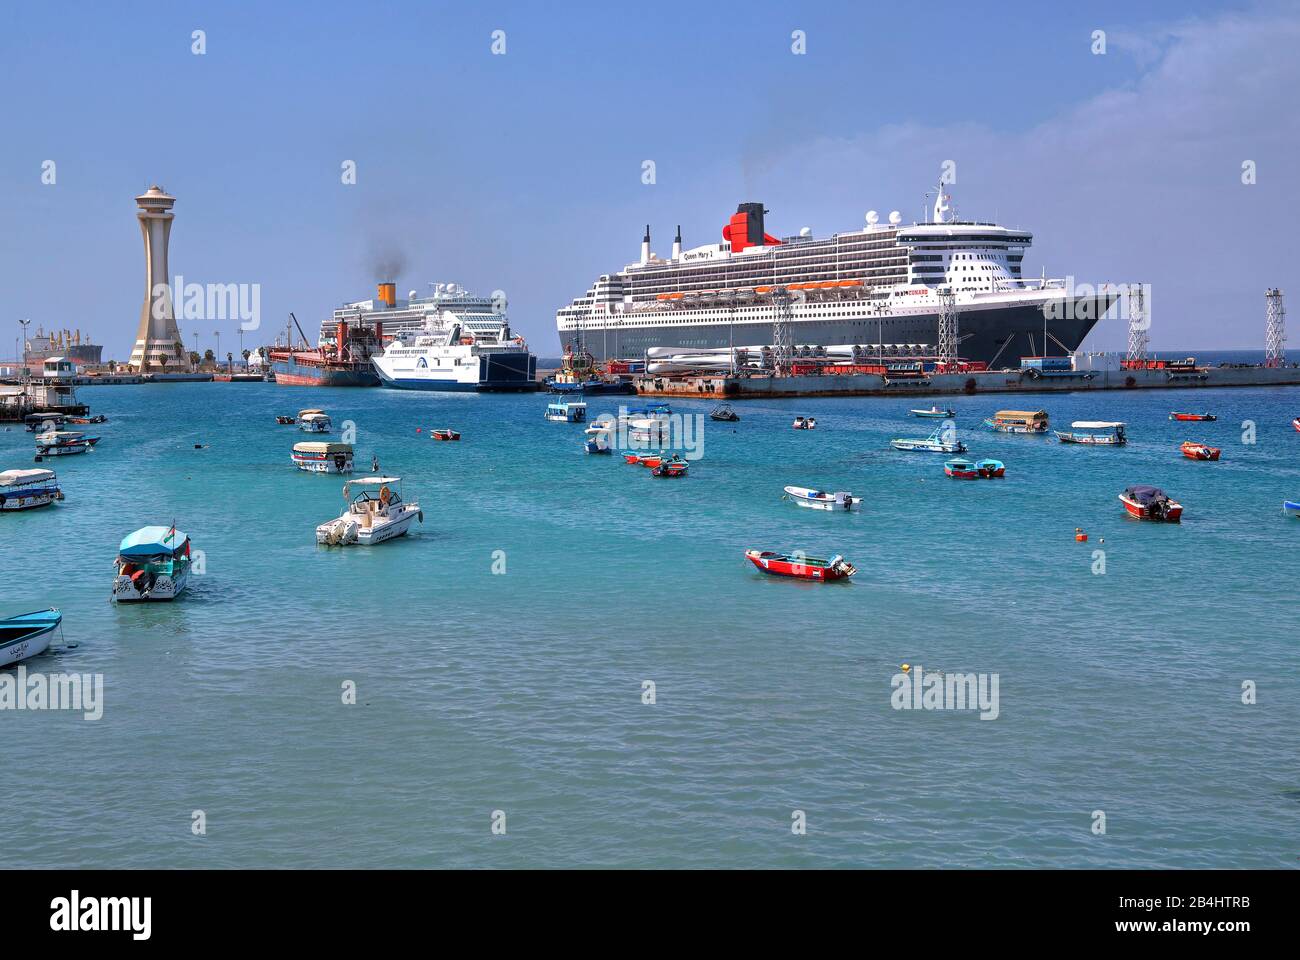 Pleasure boats and cruise ships Costa Victoria and Queen Mary 2 in the port Akaba Aqaba, Gulf of Aqaba, Red Sea, Jordan Stock Photo